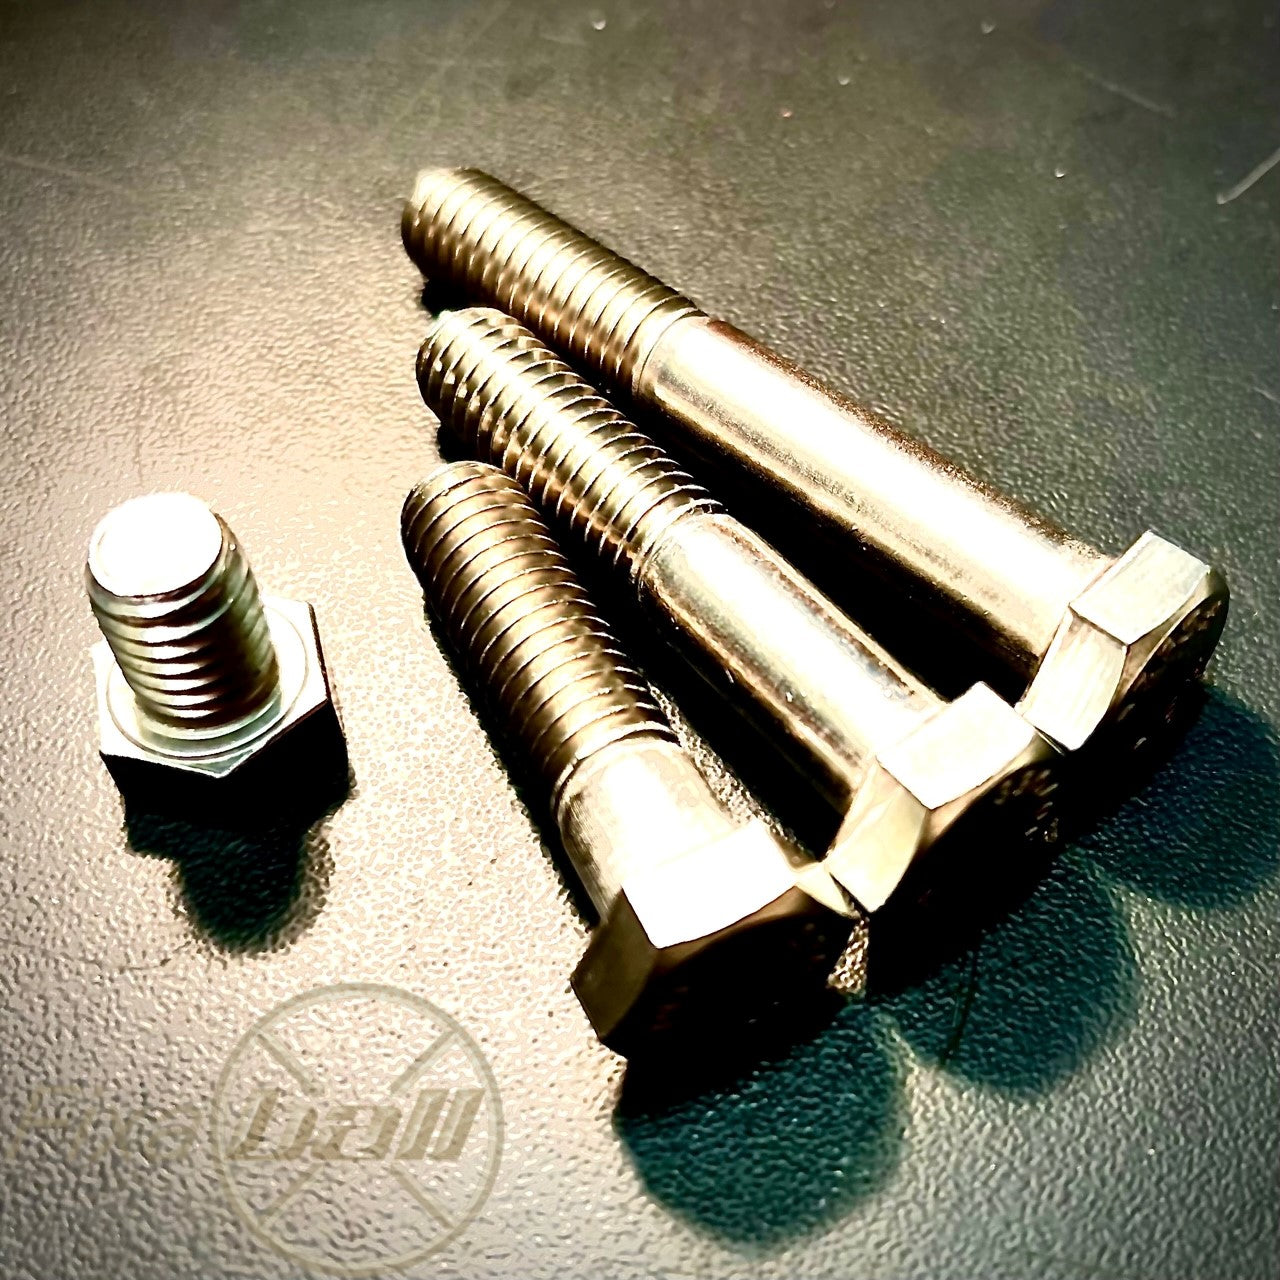 UNC 5/16", Hex Bolt and Hex Set Screw, A2/ 304 Stainless Steel, DIN 931. Hex-Bolt UNC 5/16", Hex Bolt and Hex Set Screw, A2/ 304 Stainless Steel, DIN 931. UNC, Hex-Bolt